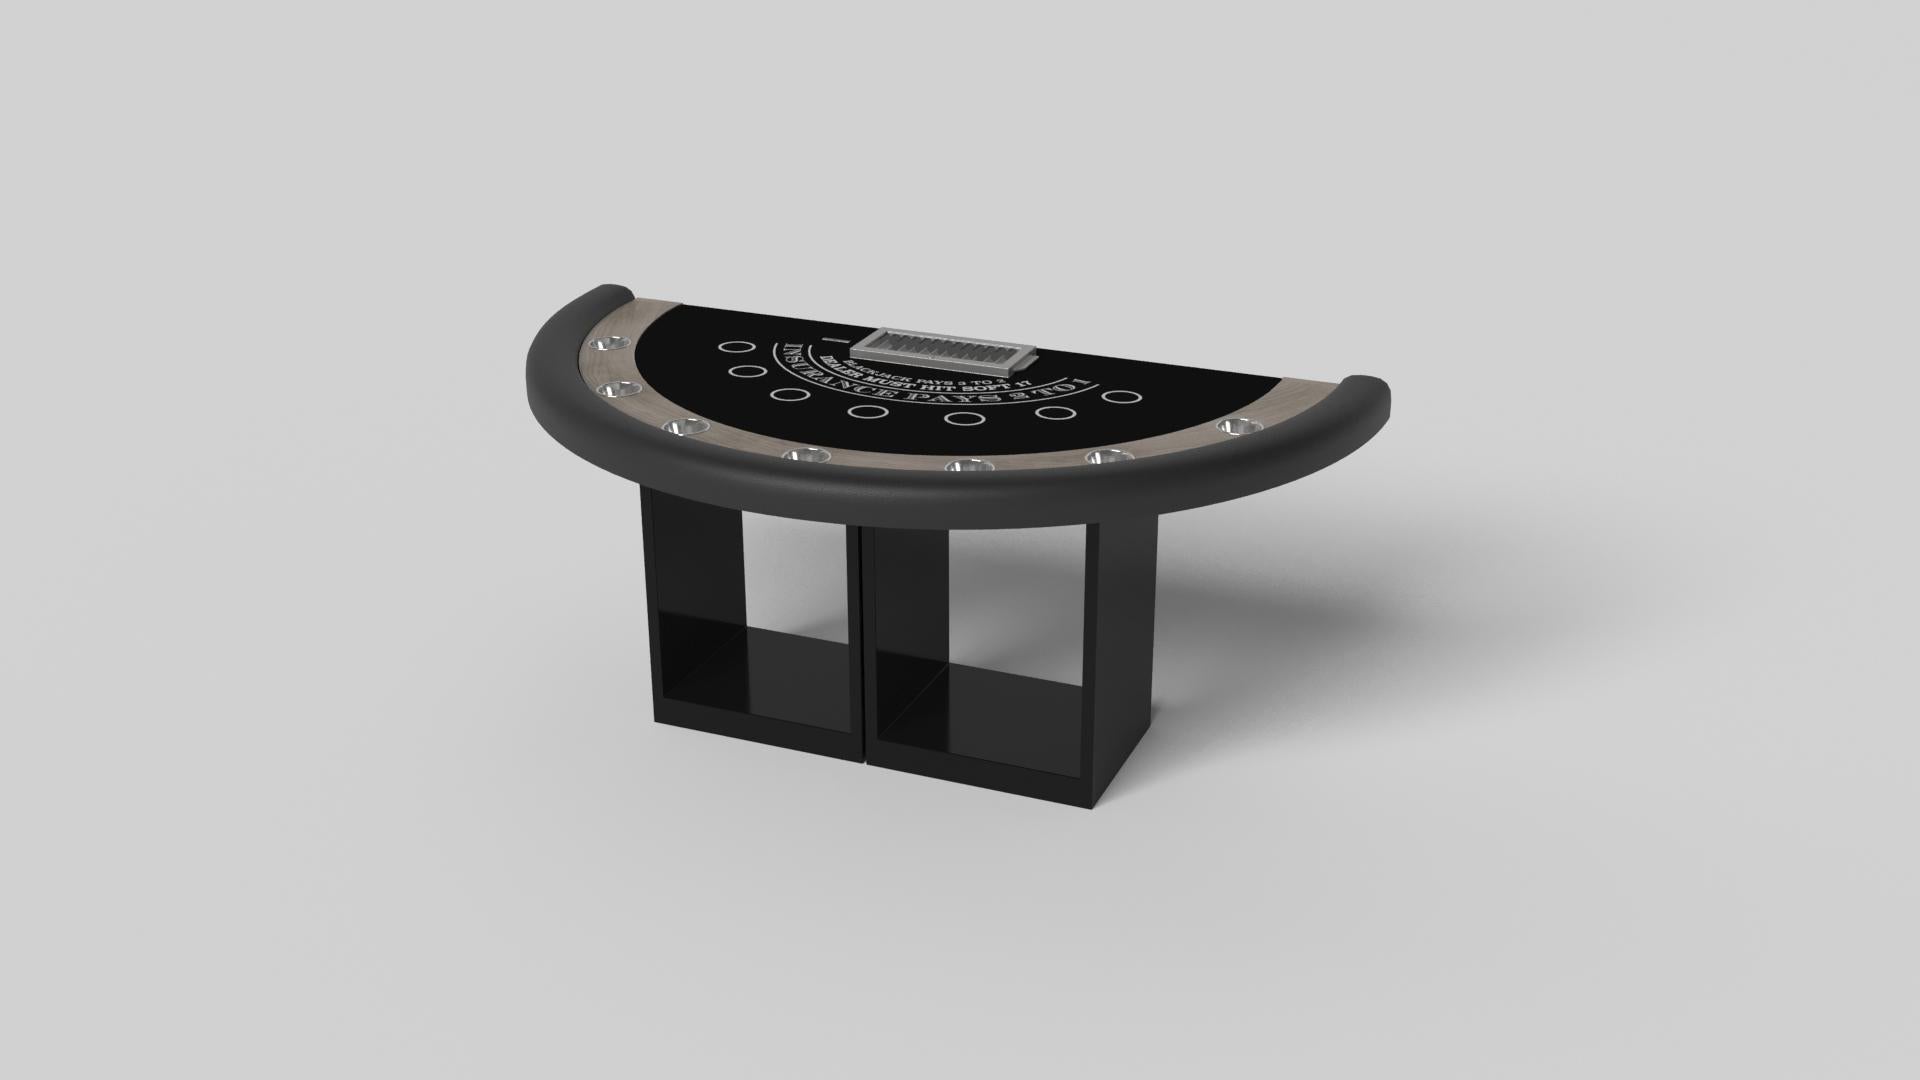 Supported by two rectangular open pedestals as the base, the Ambrosia blackjack table is modern and minimalistic with its combination of simple, geometric forms. Viewed from the front, the use of negative space is evident; viewed from the side, the